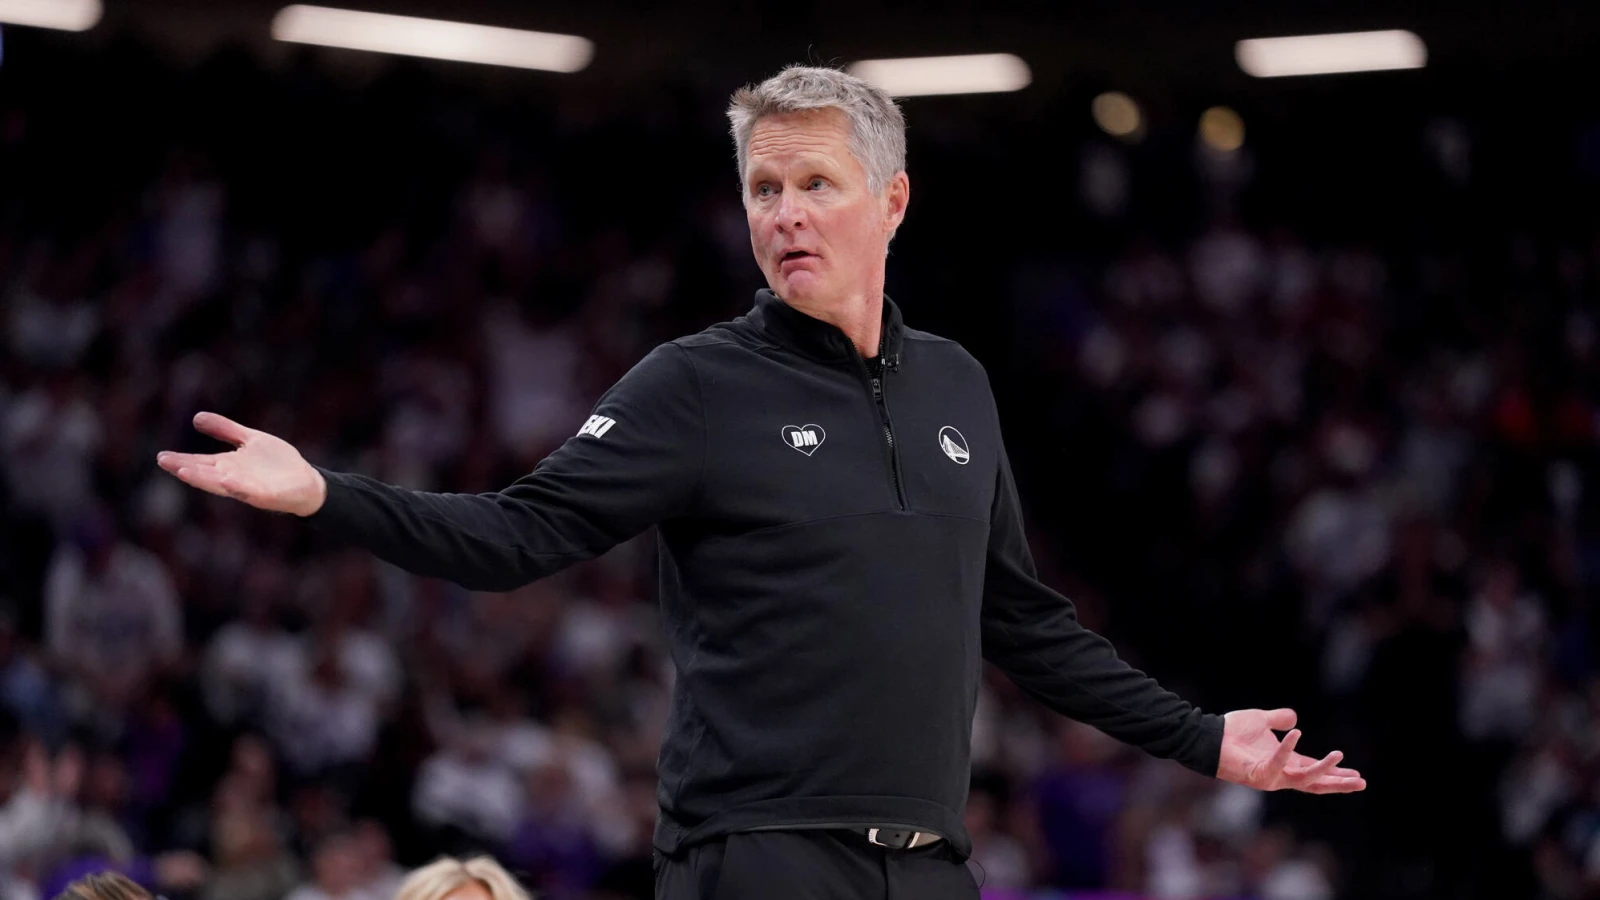 The Future of the Golden State Warriors Steve Kerr and the Era's End